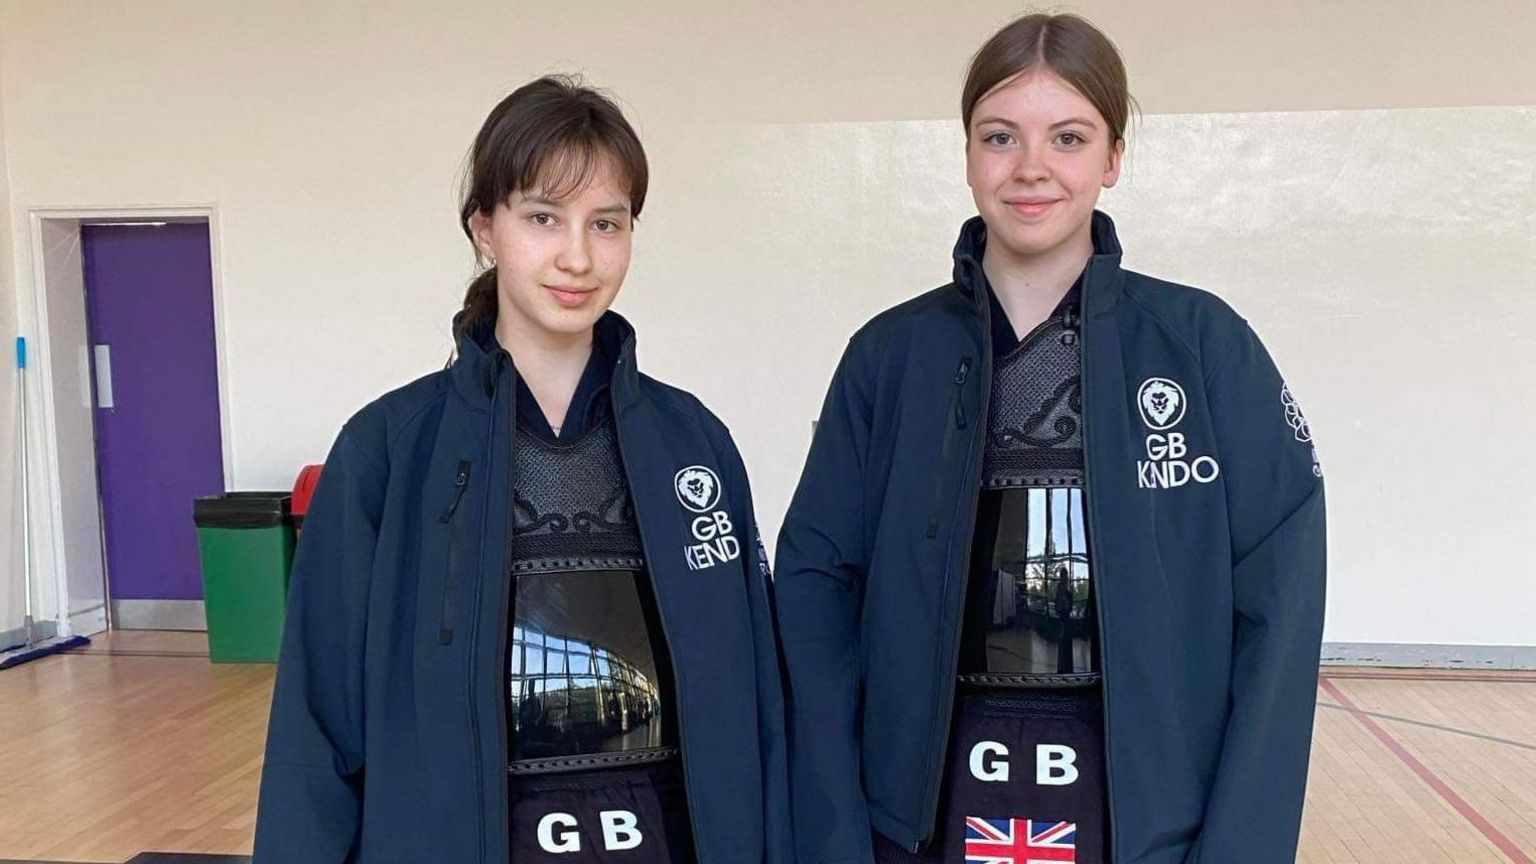 Keira (left) and Chloe pictured smiling while wearing their Team GB Kendo uniform